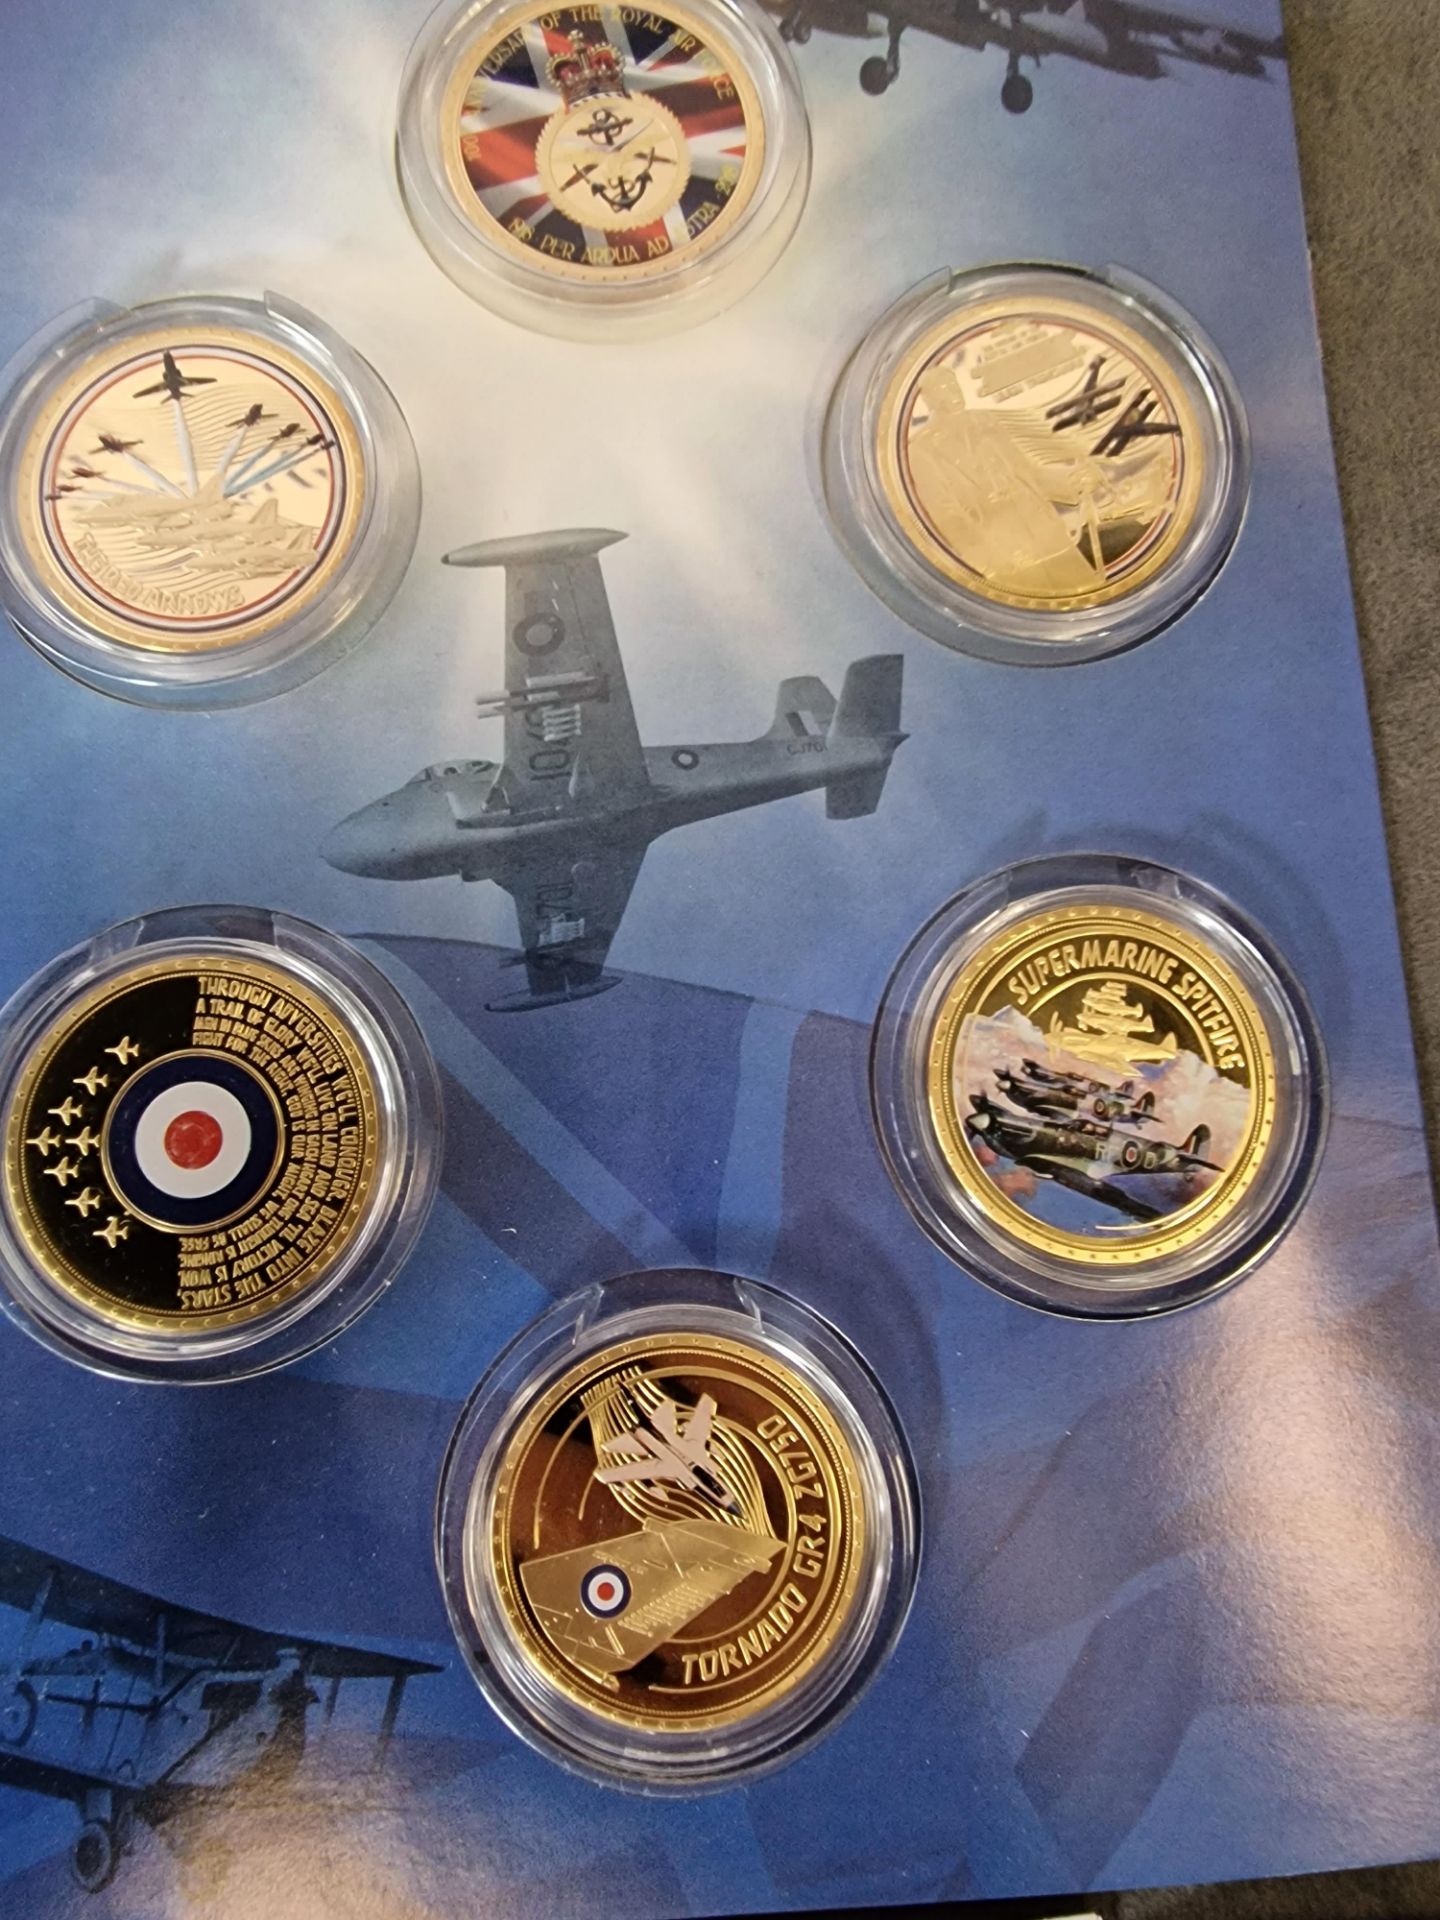 Windsor Mint 100th anniversary Royal Air Force coin collection comprising of 6 coins in presentation